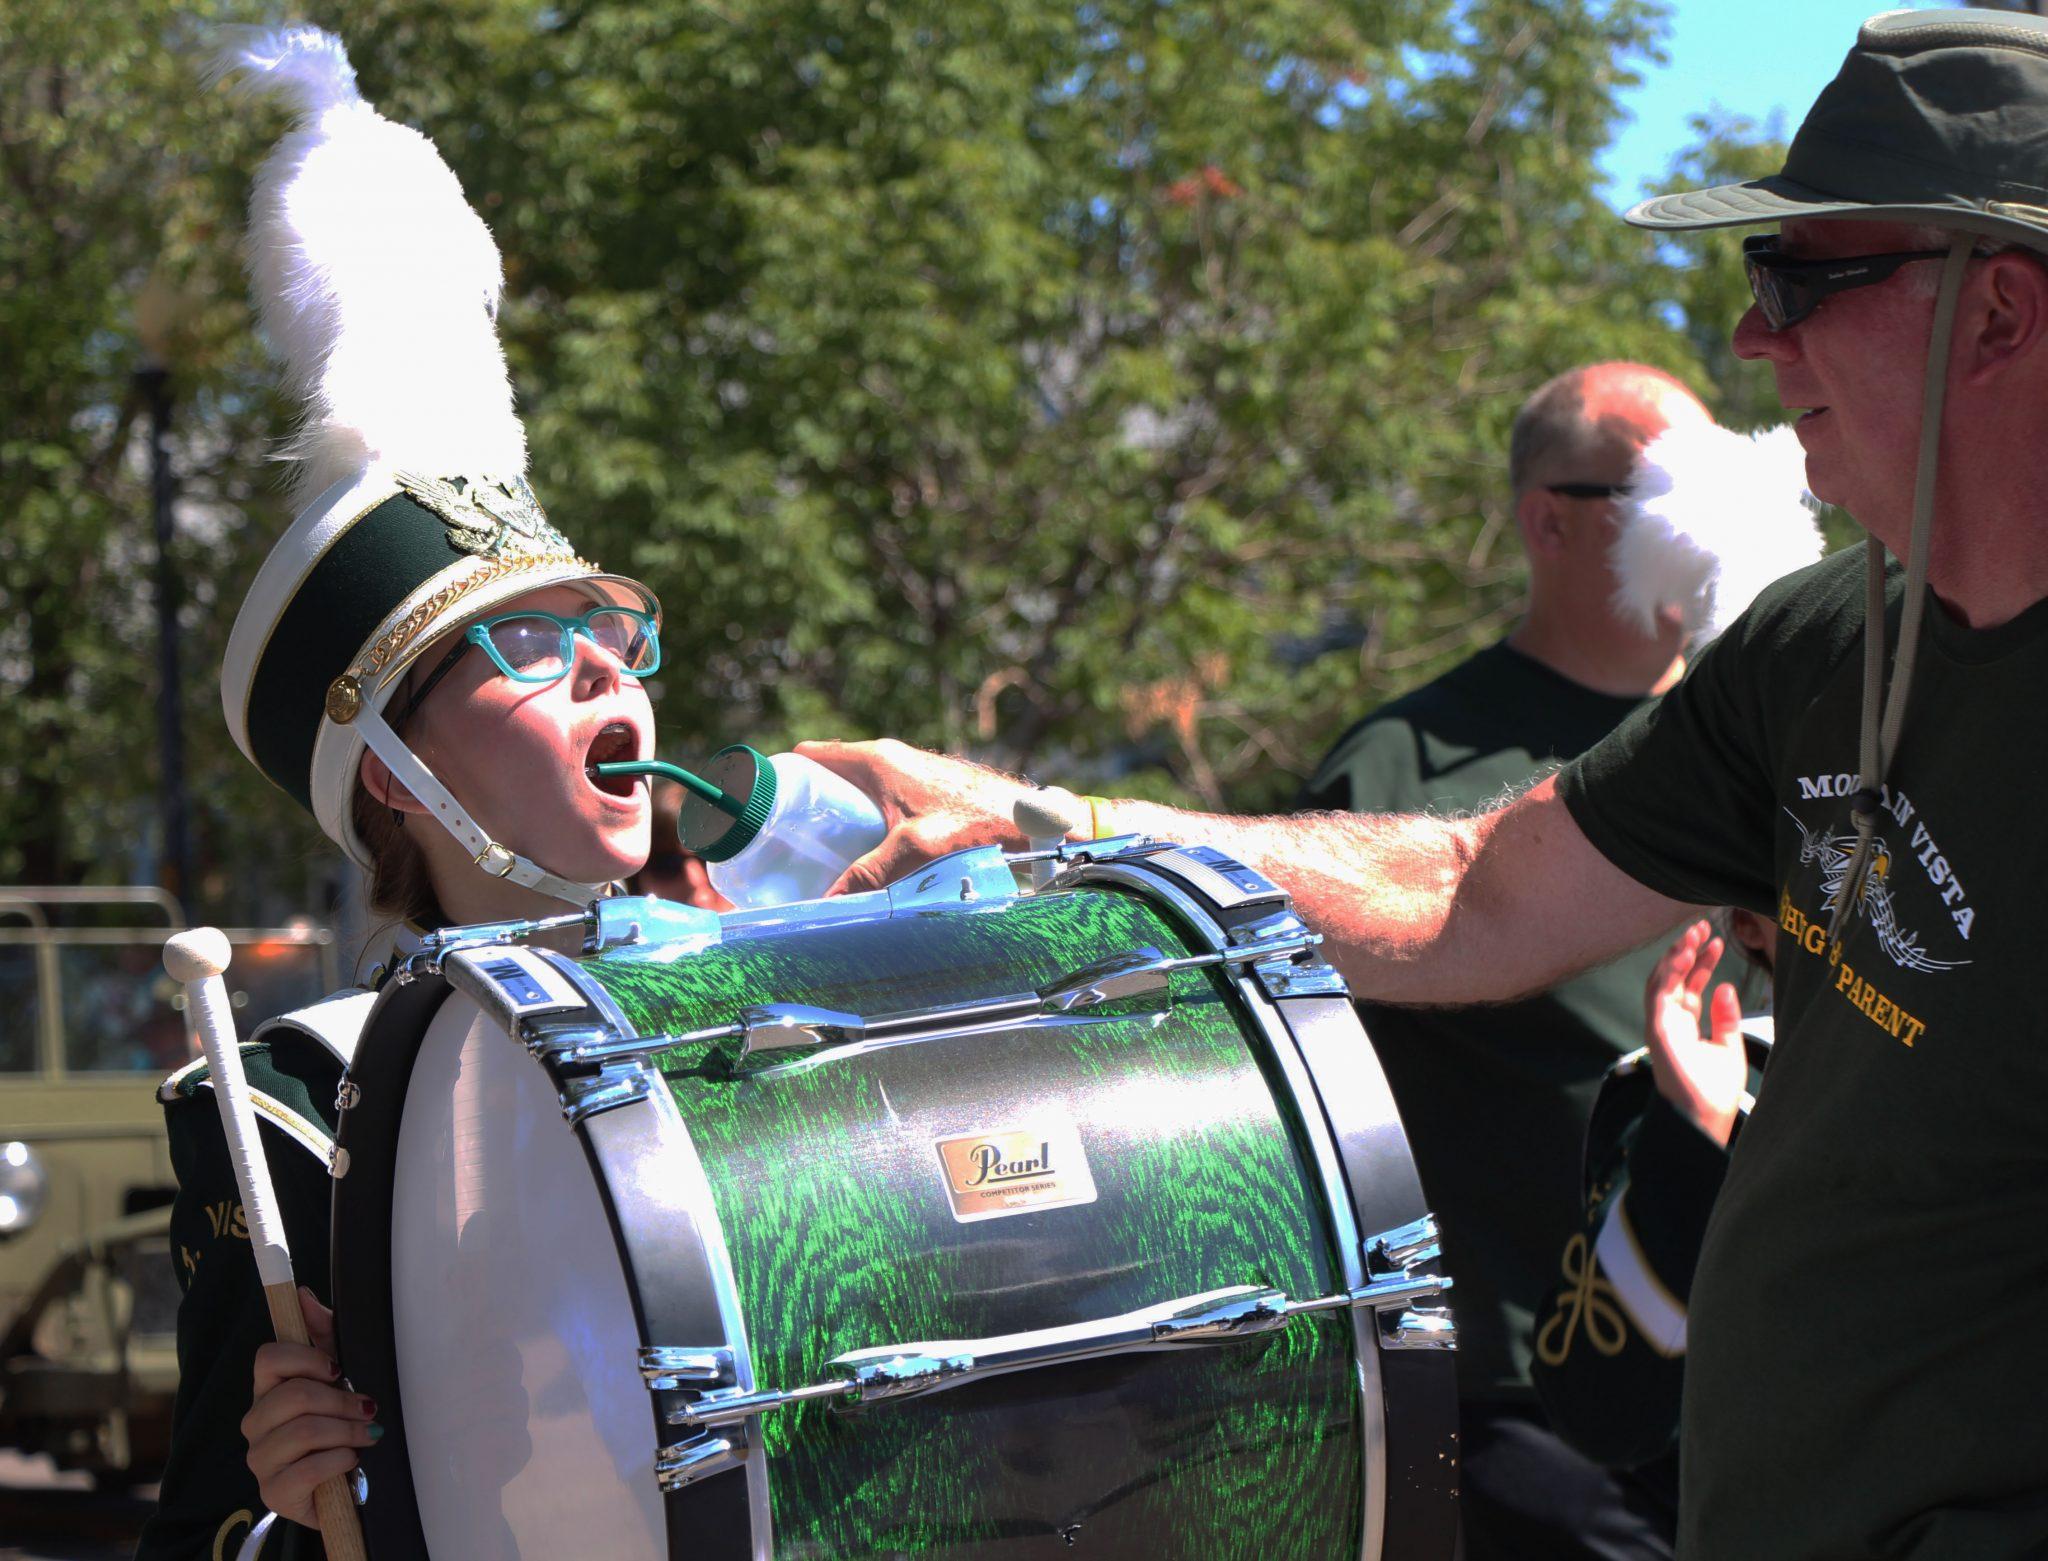 PHOTO+GALLERY%3A+Marching+Band+at+Western+Welcome+Week